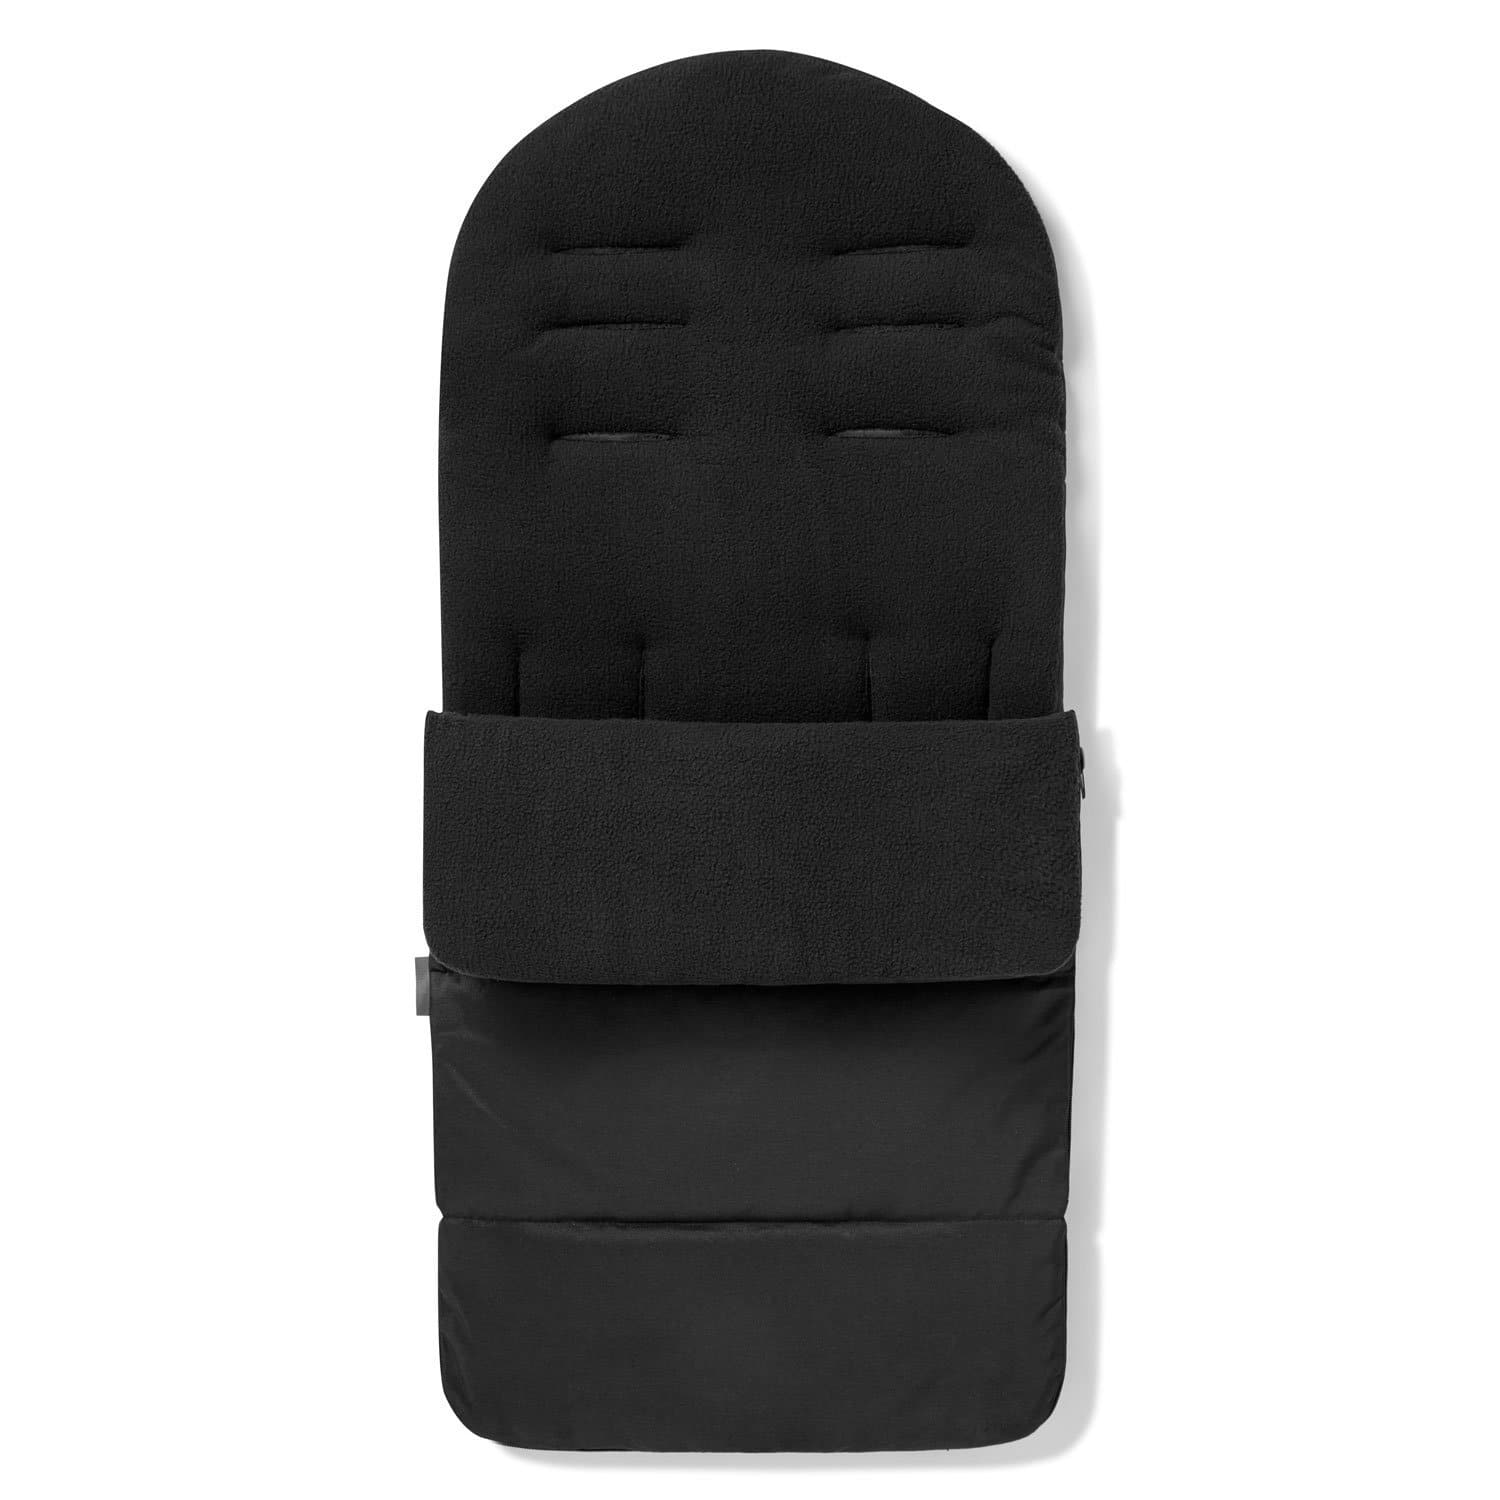 Premium Footmuff / Cosy Toes Compatible with Baby Elegance - Black Jack / Fits All Models | For Your Little One